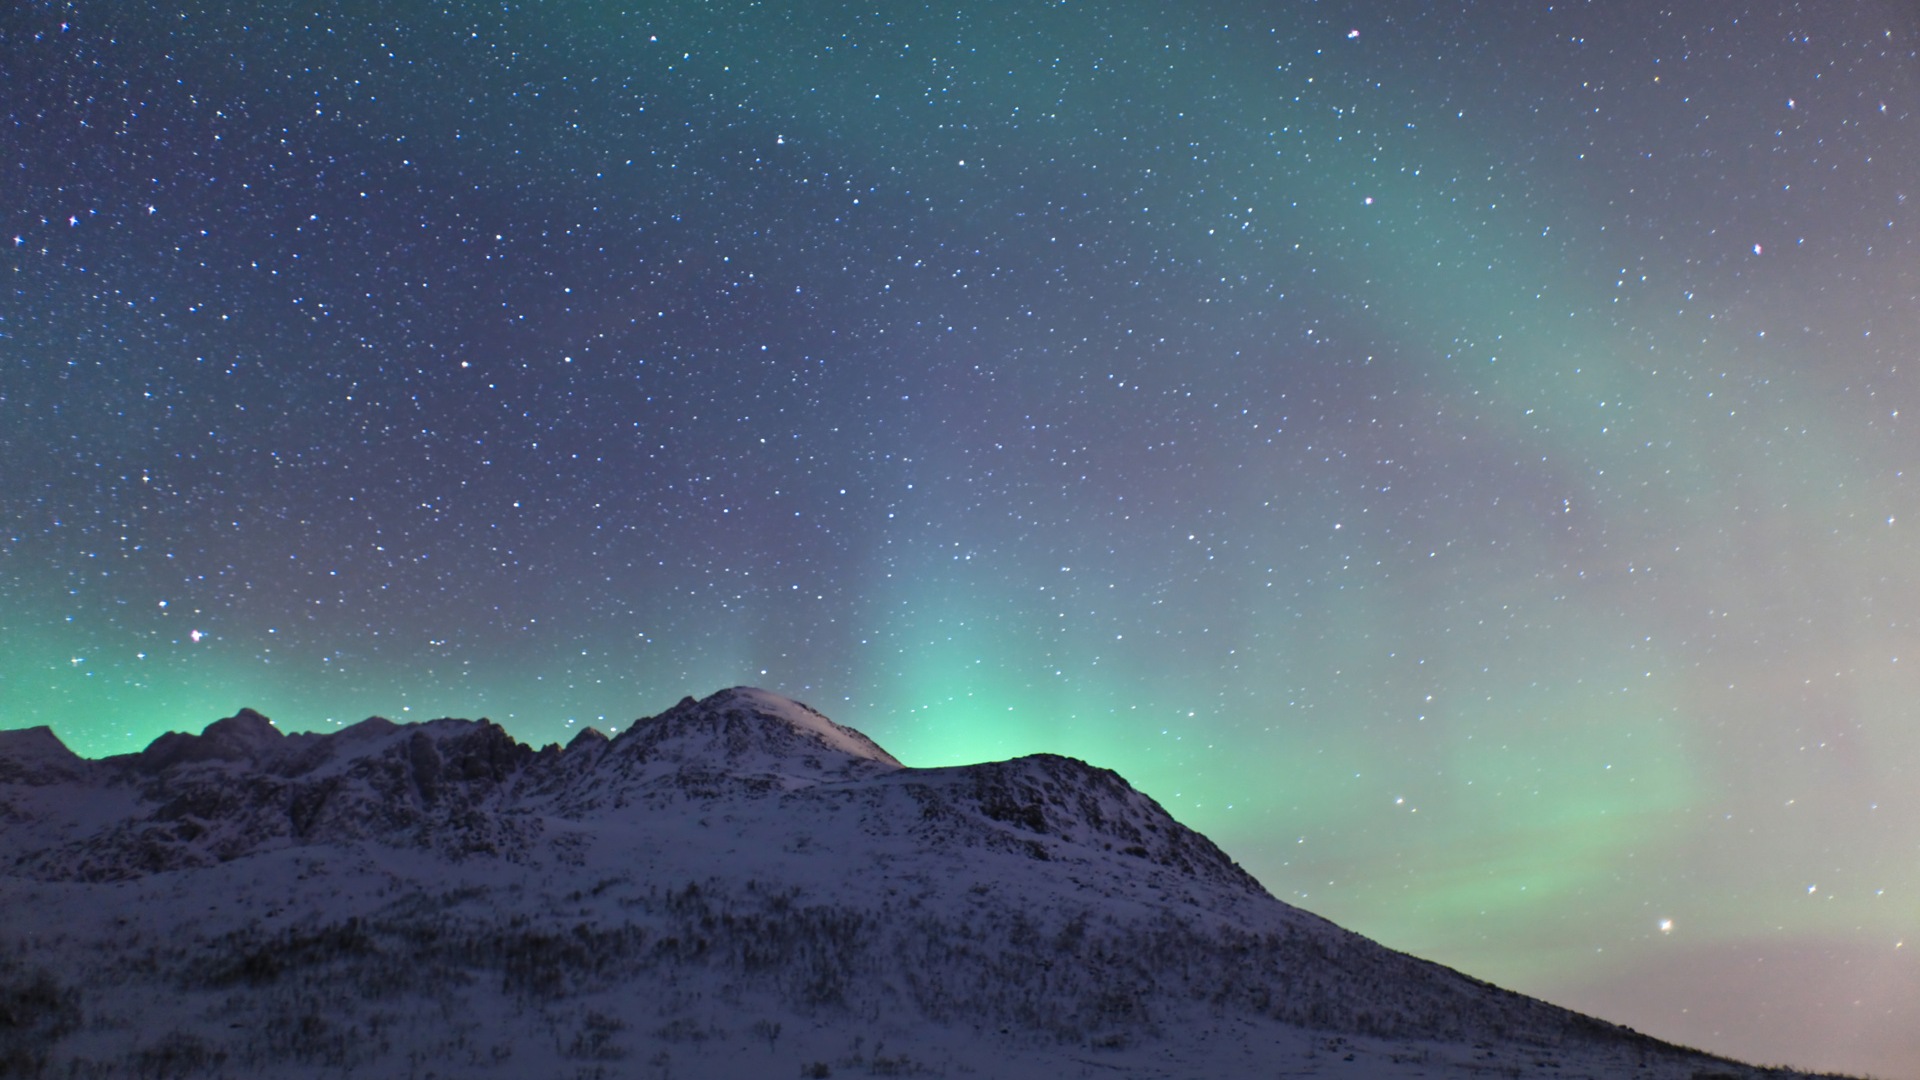 Natural wonders of the Northern Lights HD Wallpaper (2) #17 - 1920x1080